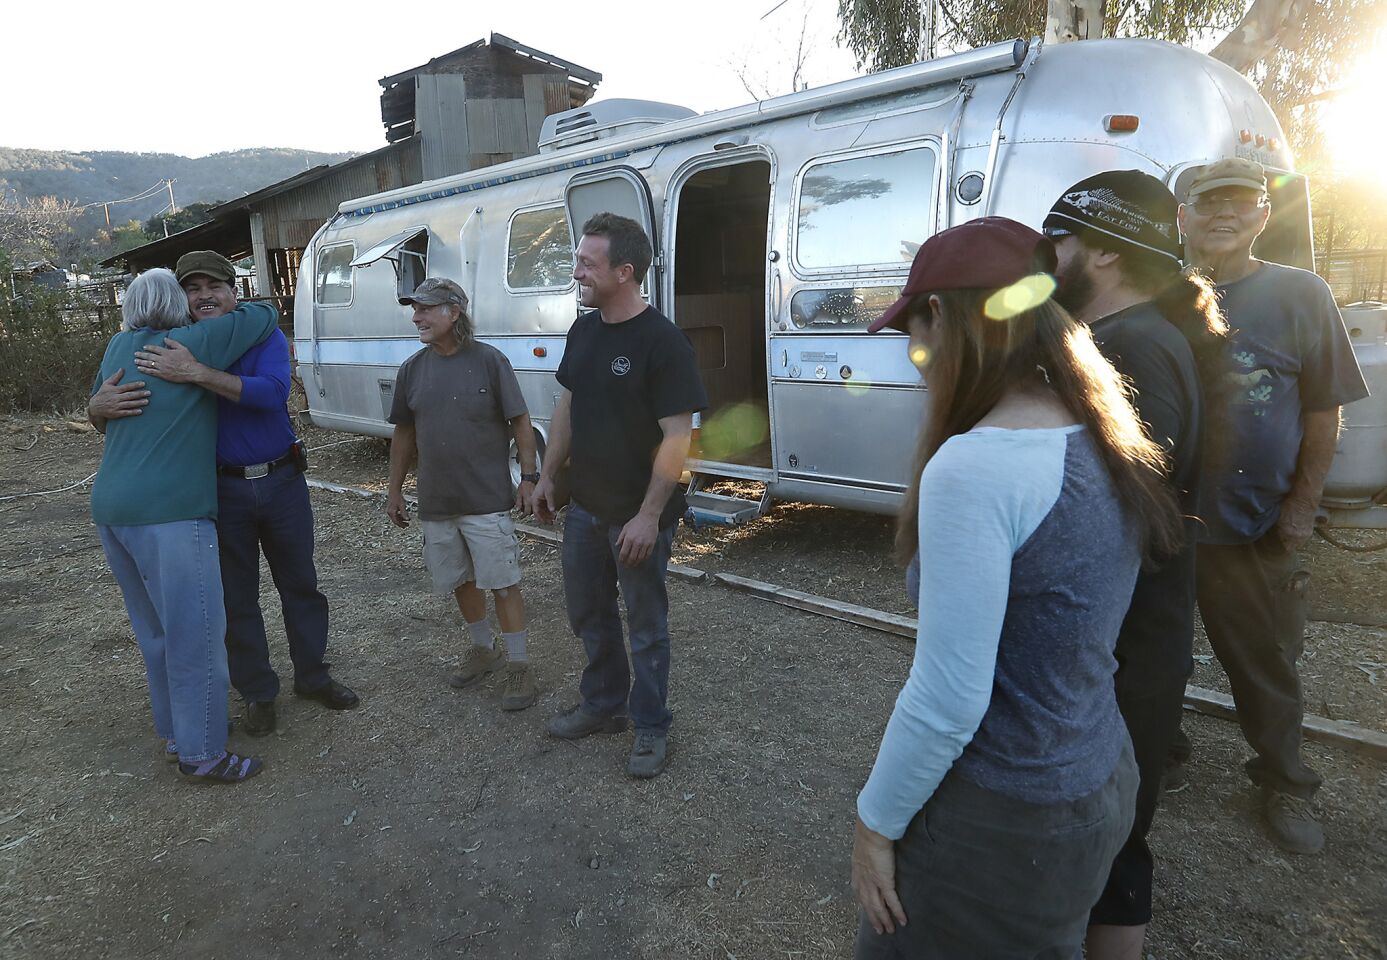 Daniel Vasquez, second from left, receives a hug from Mary Bryan after learning that an Airstream trailer became available for him to live in. His trailer was destoryed in the Thomas fire.